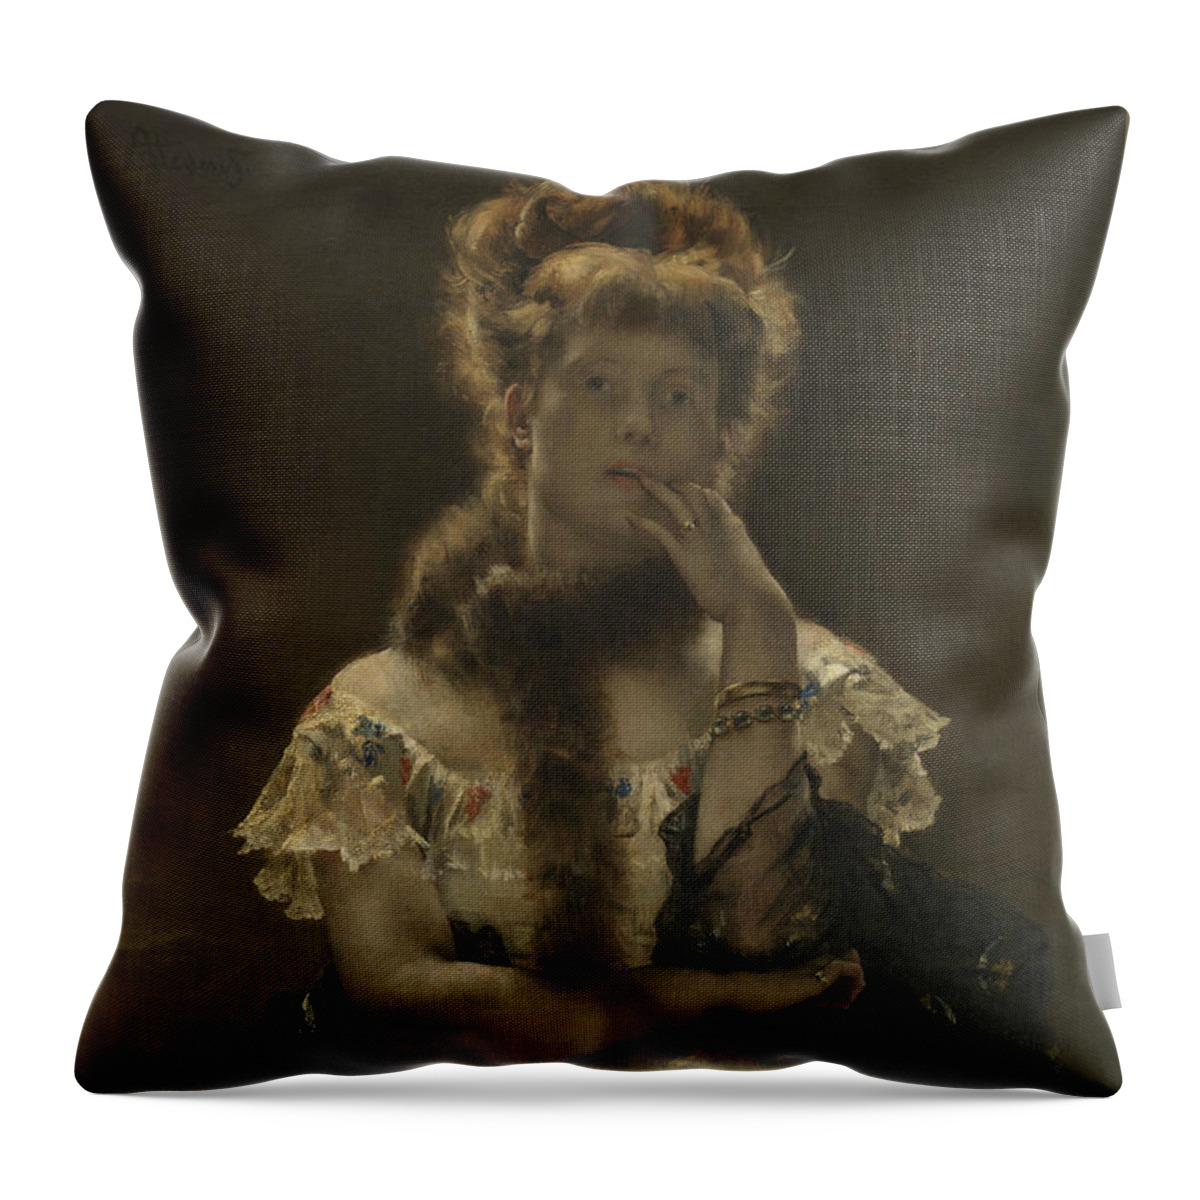 19th Century Art Throw Pillow featuring the painting The Parisian Sphinx by Alfred Stevens